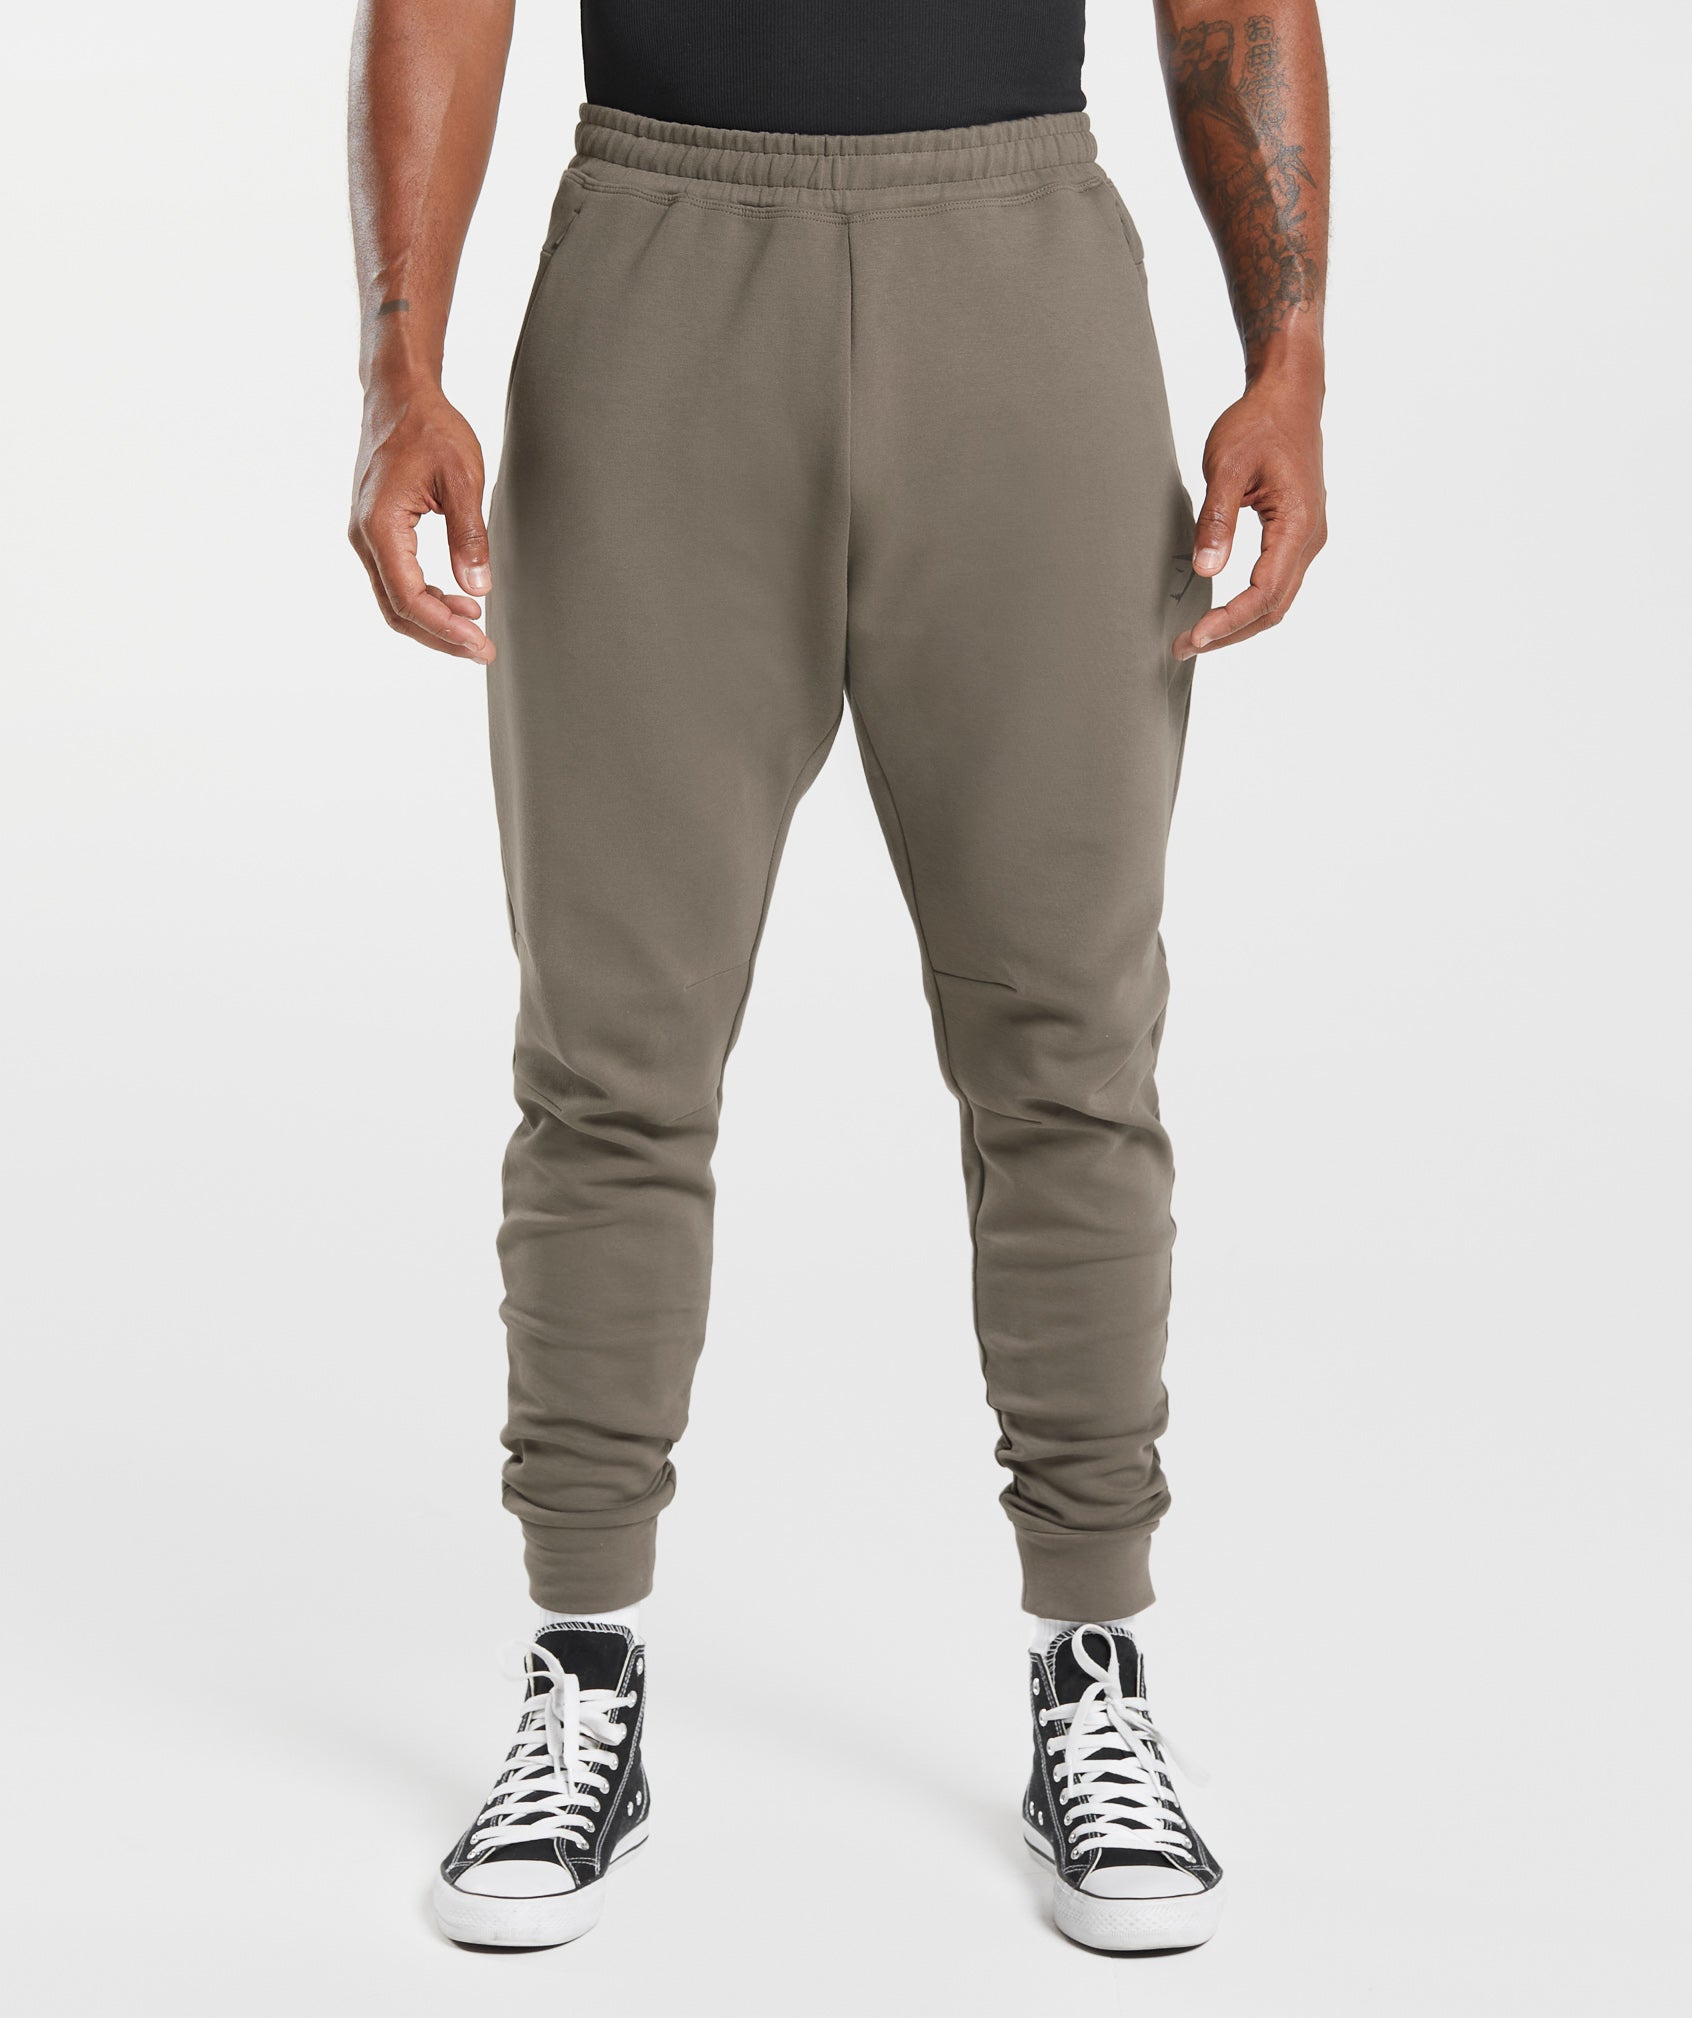 Gymshark Rest Day Knit Joggers - Camo Brown